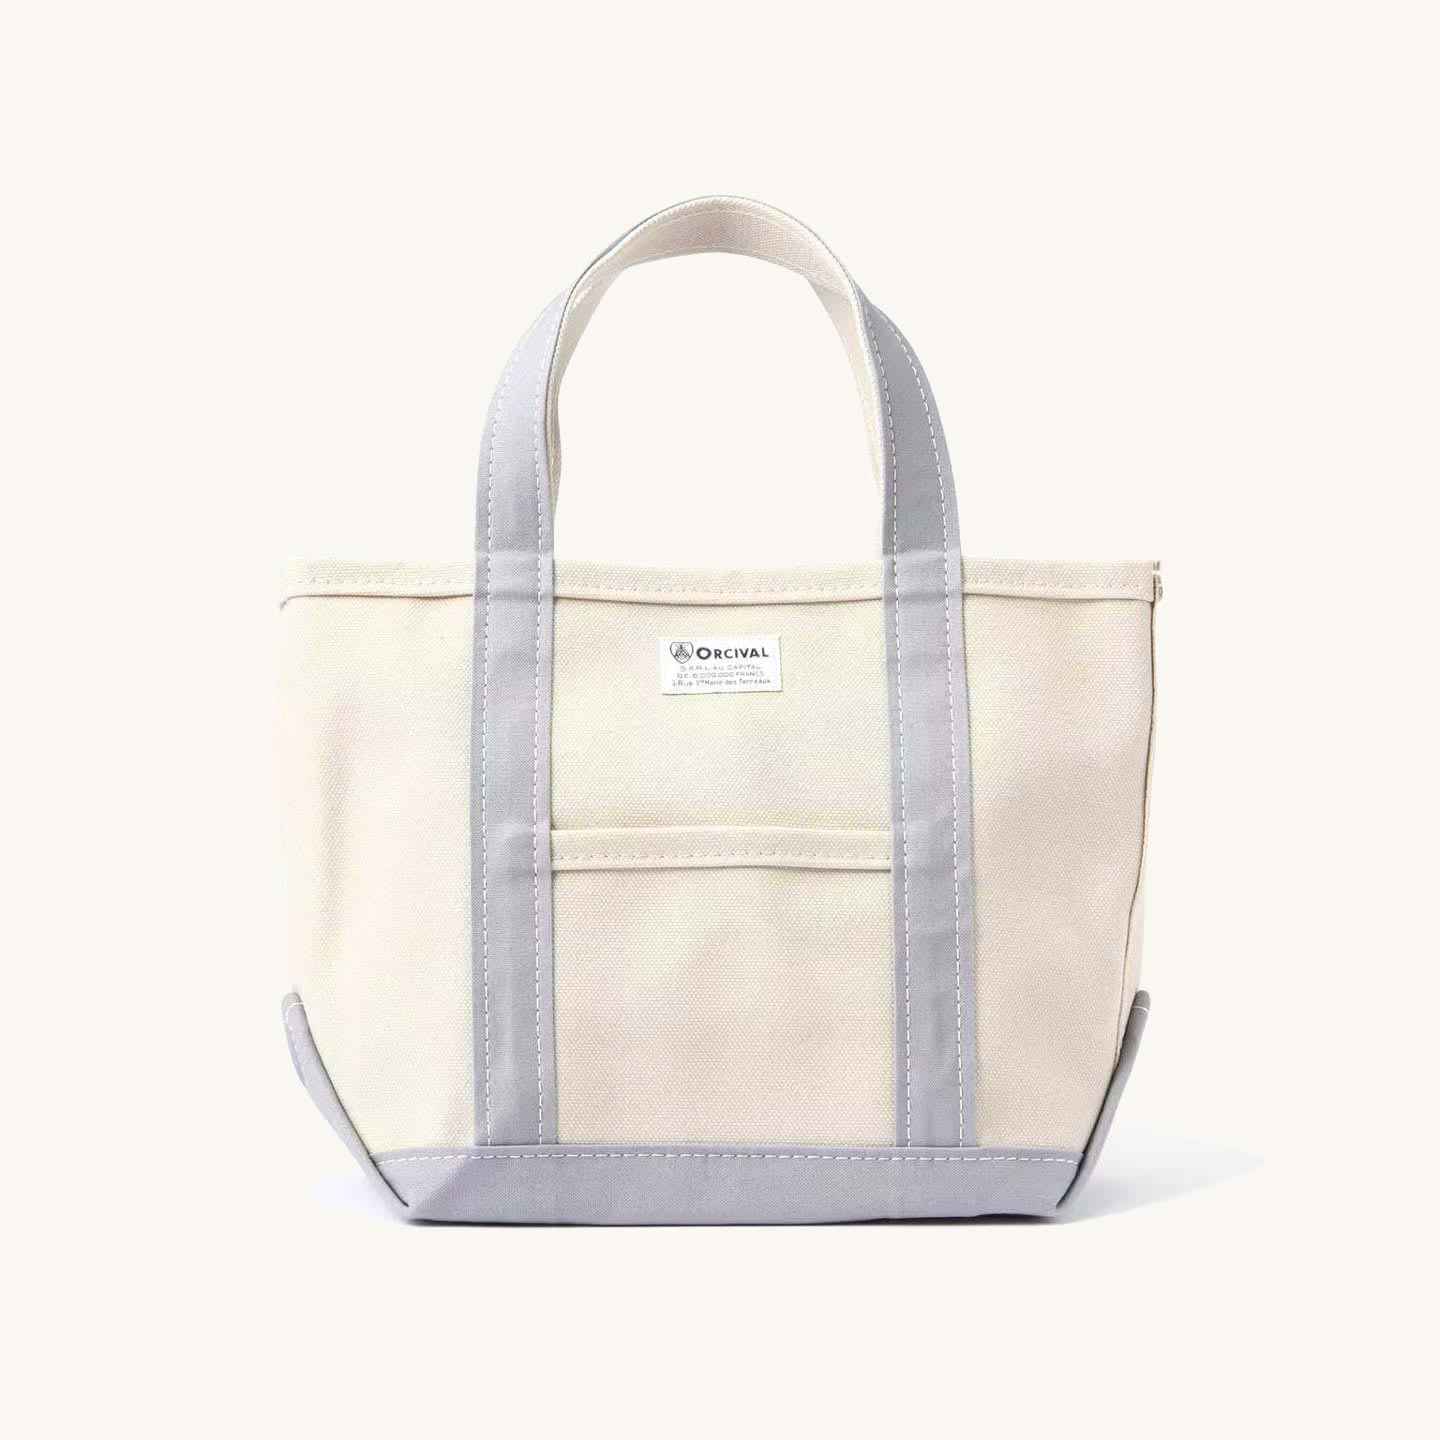 The Smocky Blue tote bag, in a small size, by Orcival